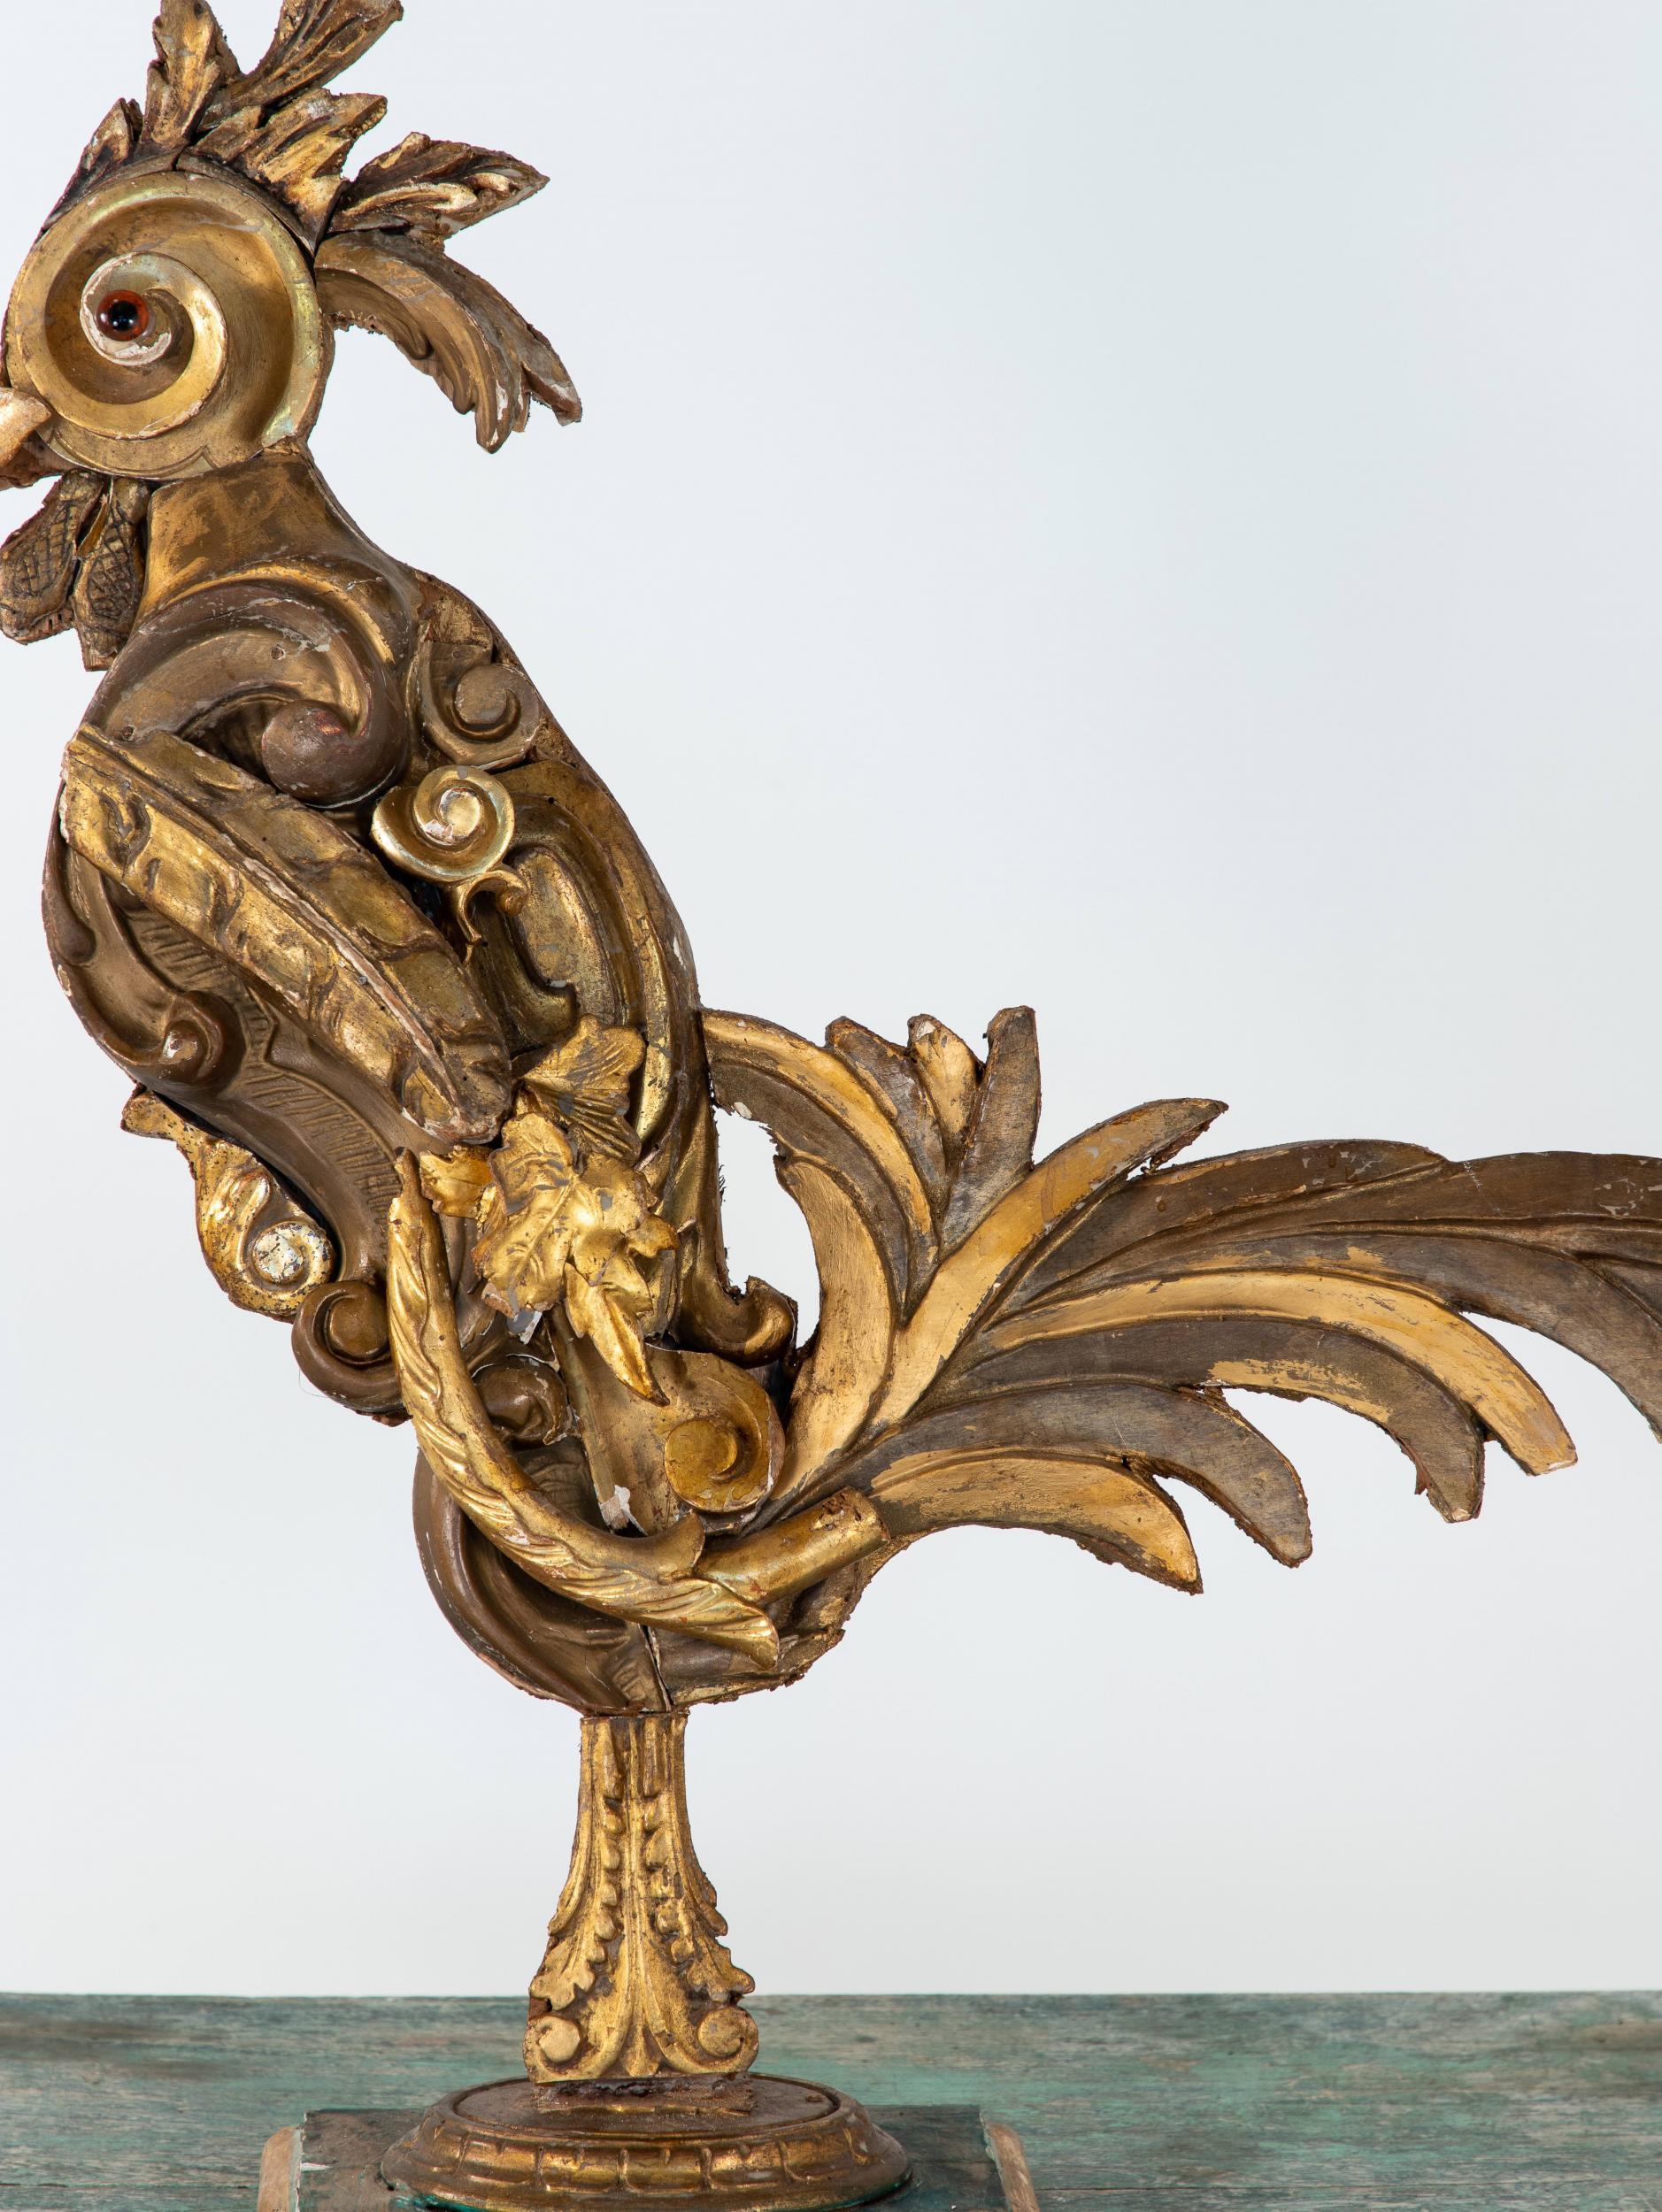 All handmade by an Italian artisan, this Rooster is constructed of many reclaimed fragments. A single piece of giltwood fragment inspires the artisan to create beautiful roosters, fish, and sunbursts. Then each fragment is selected and